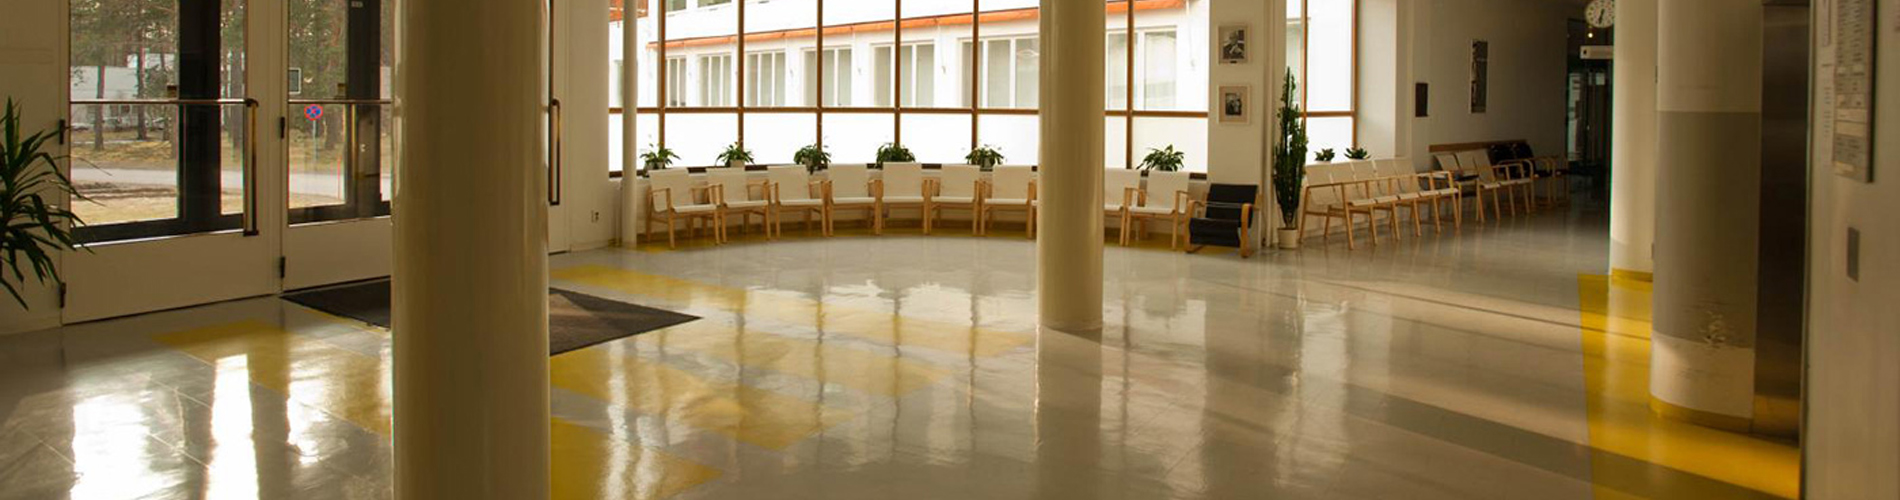 Complete Janitorial ServicesProfessional Care For All Facilities